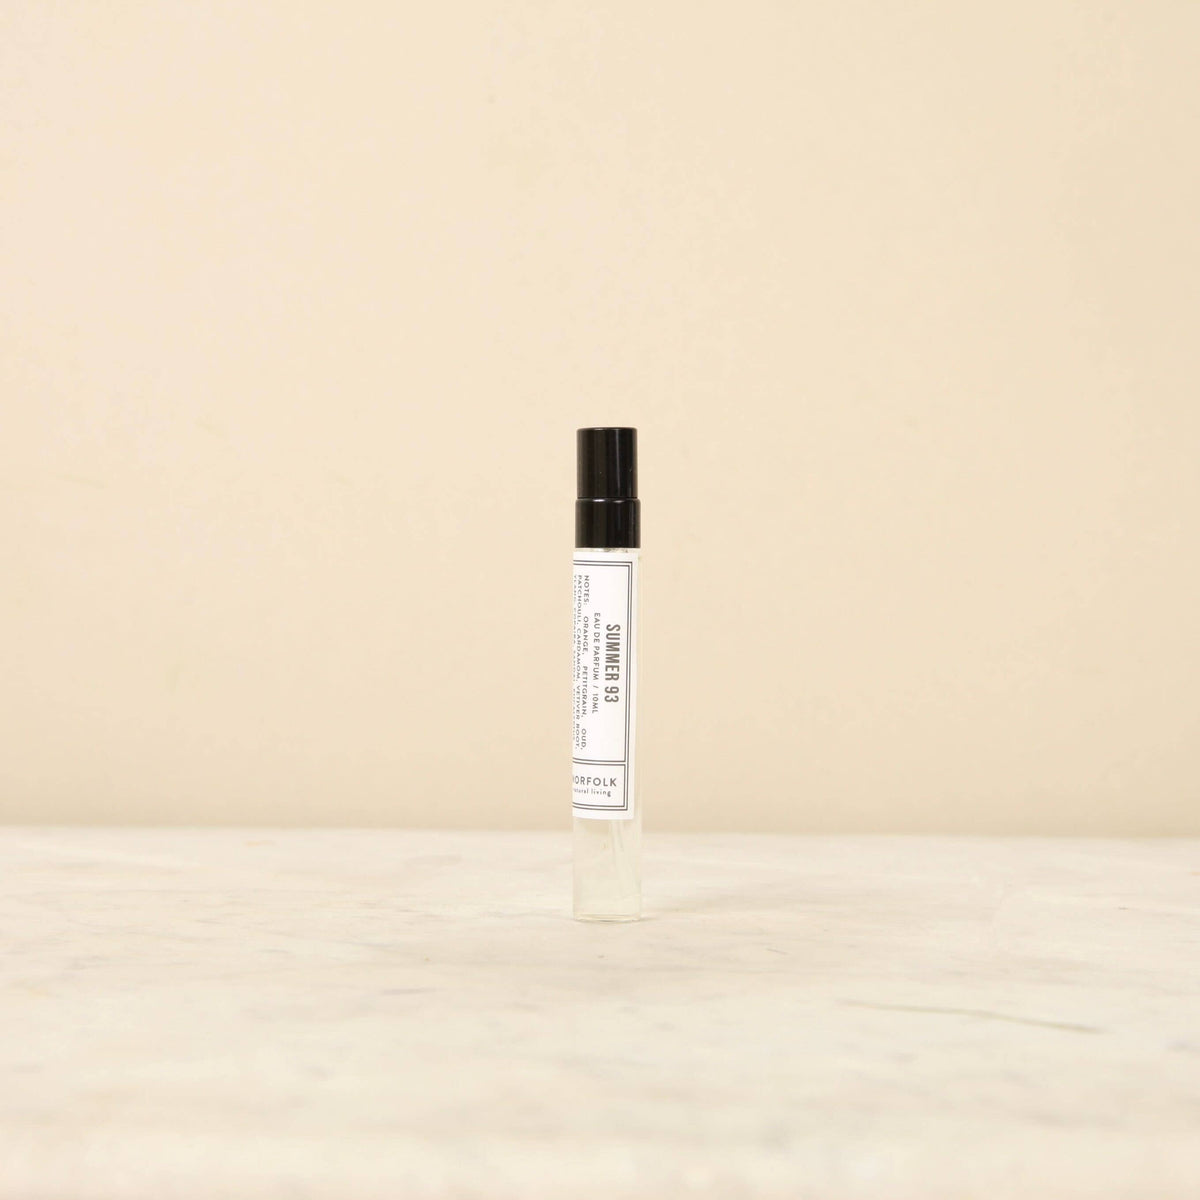 A transparent roll-on Norfolk Natural Living Days of Summer 93 10ml parfum bottle with a black cap, labeled clearly in a simple font, stands upright on a light marble surface against a pale beige background.